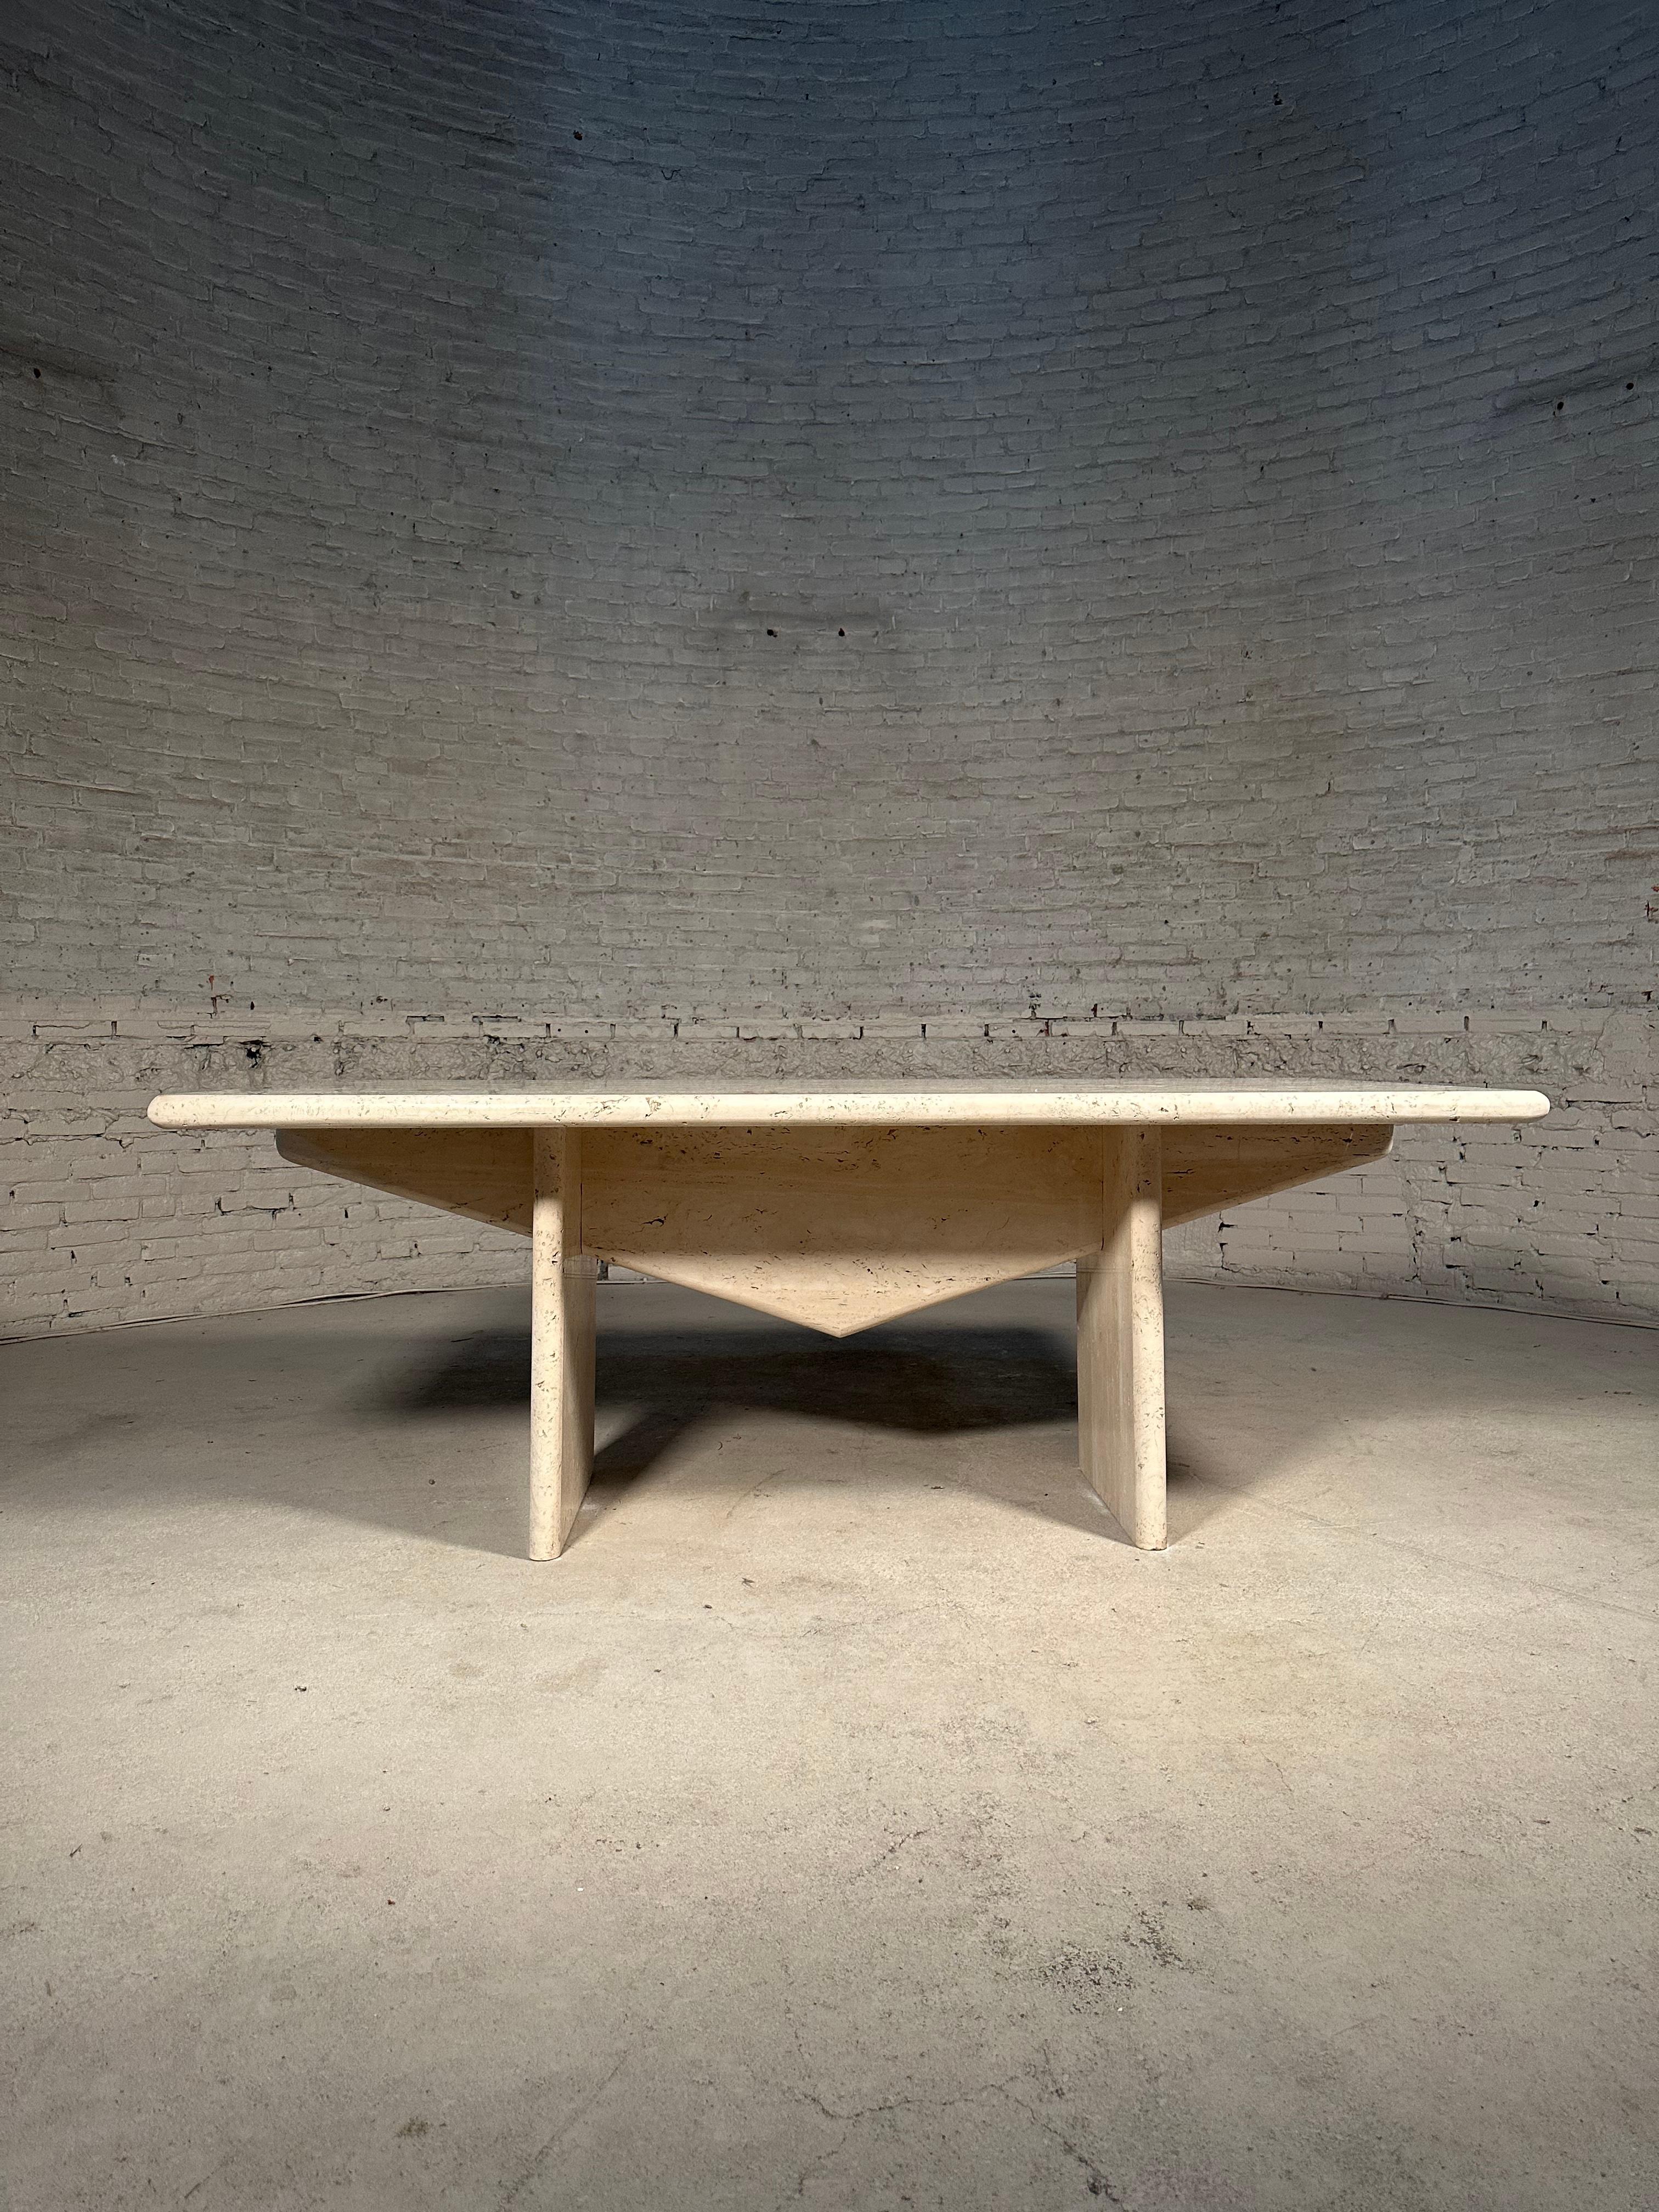 Expertly designed by the owner of a posh villa in Uccle, Brussels, this iconic Architectural Travertine Dining Table is a rare find.

With strong lines and 4cm thick travertine, this table exudes an arty and eclectic feel. Its 'brut' structure adds